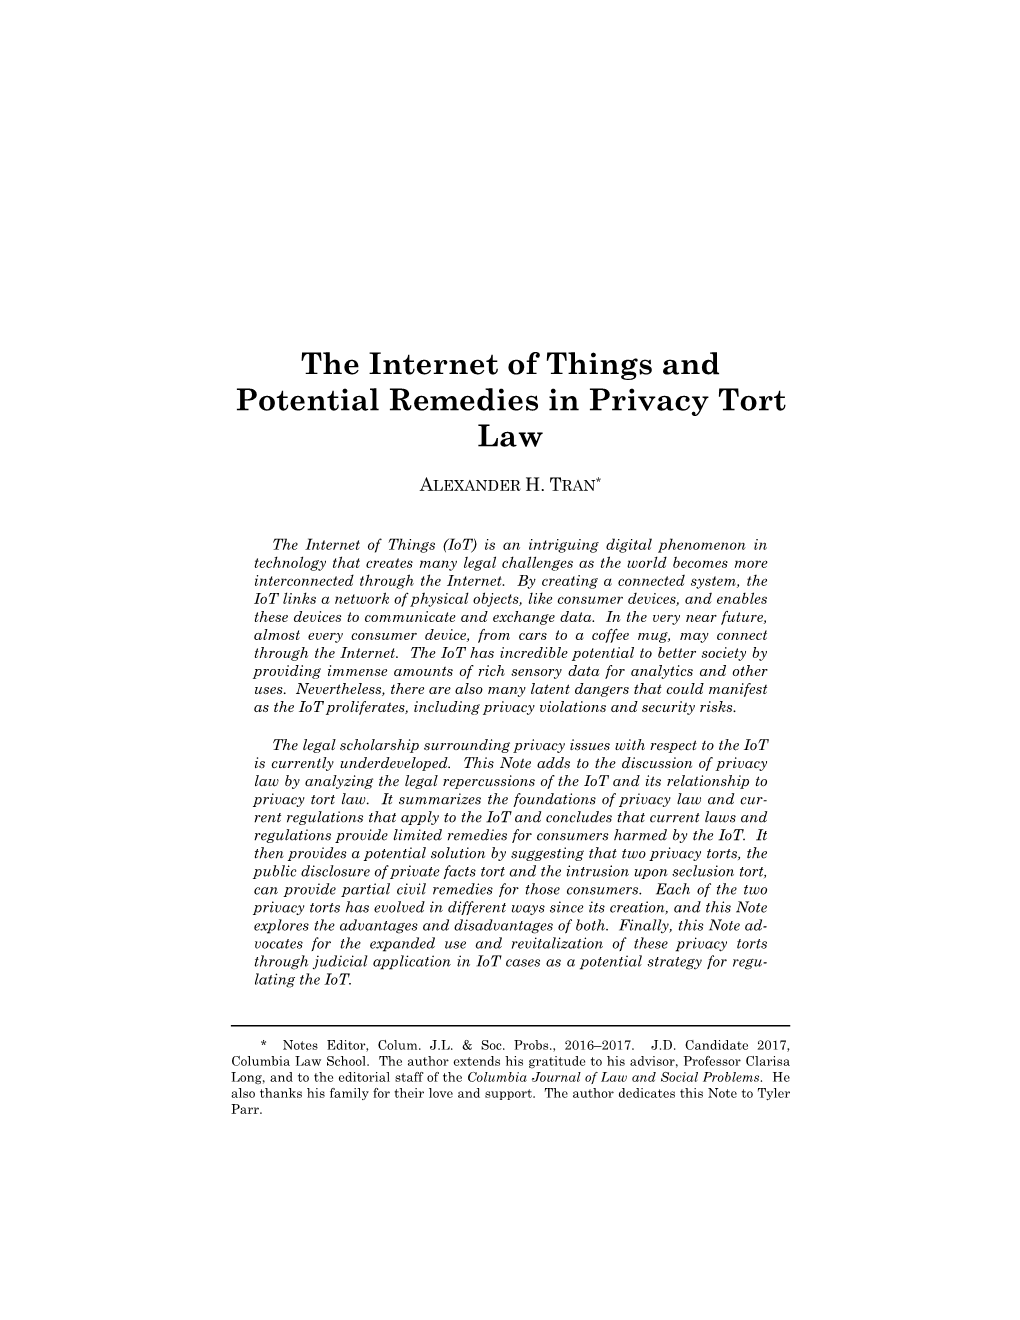 The Internet of Things and Potential Remedies in Privacy Tort Law